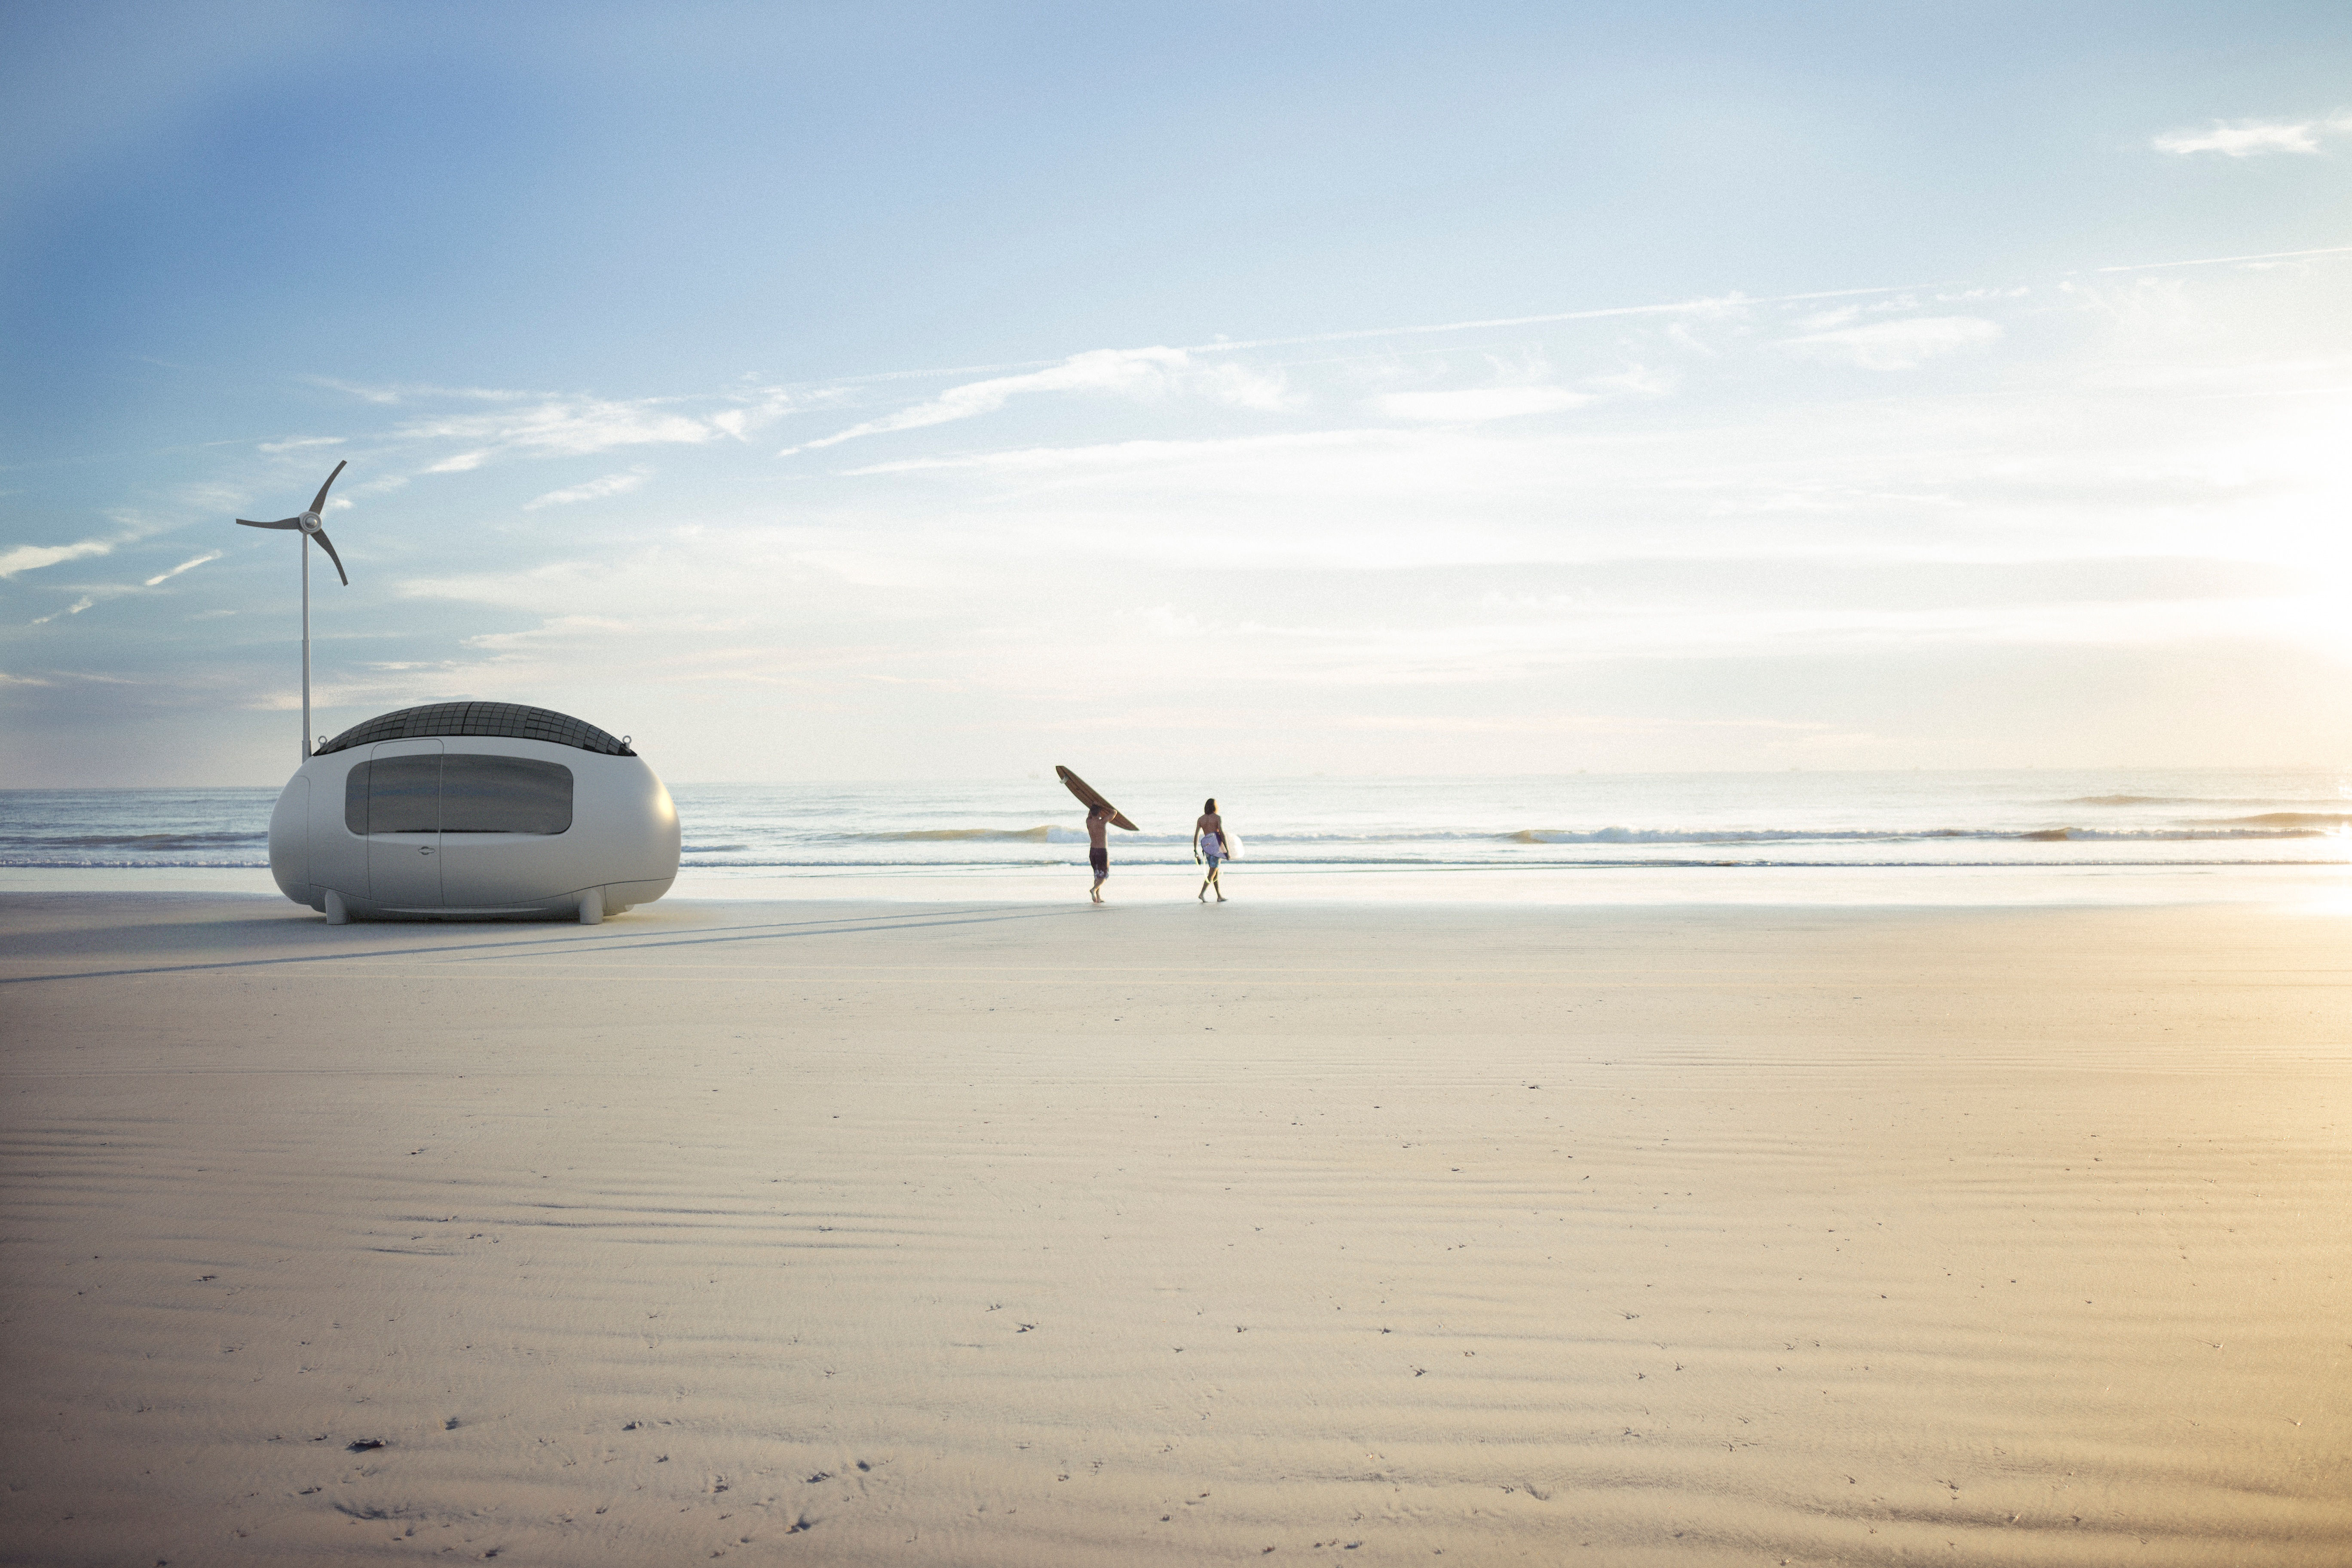 Ecocapsule owners on their way to surf.